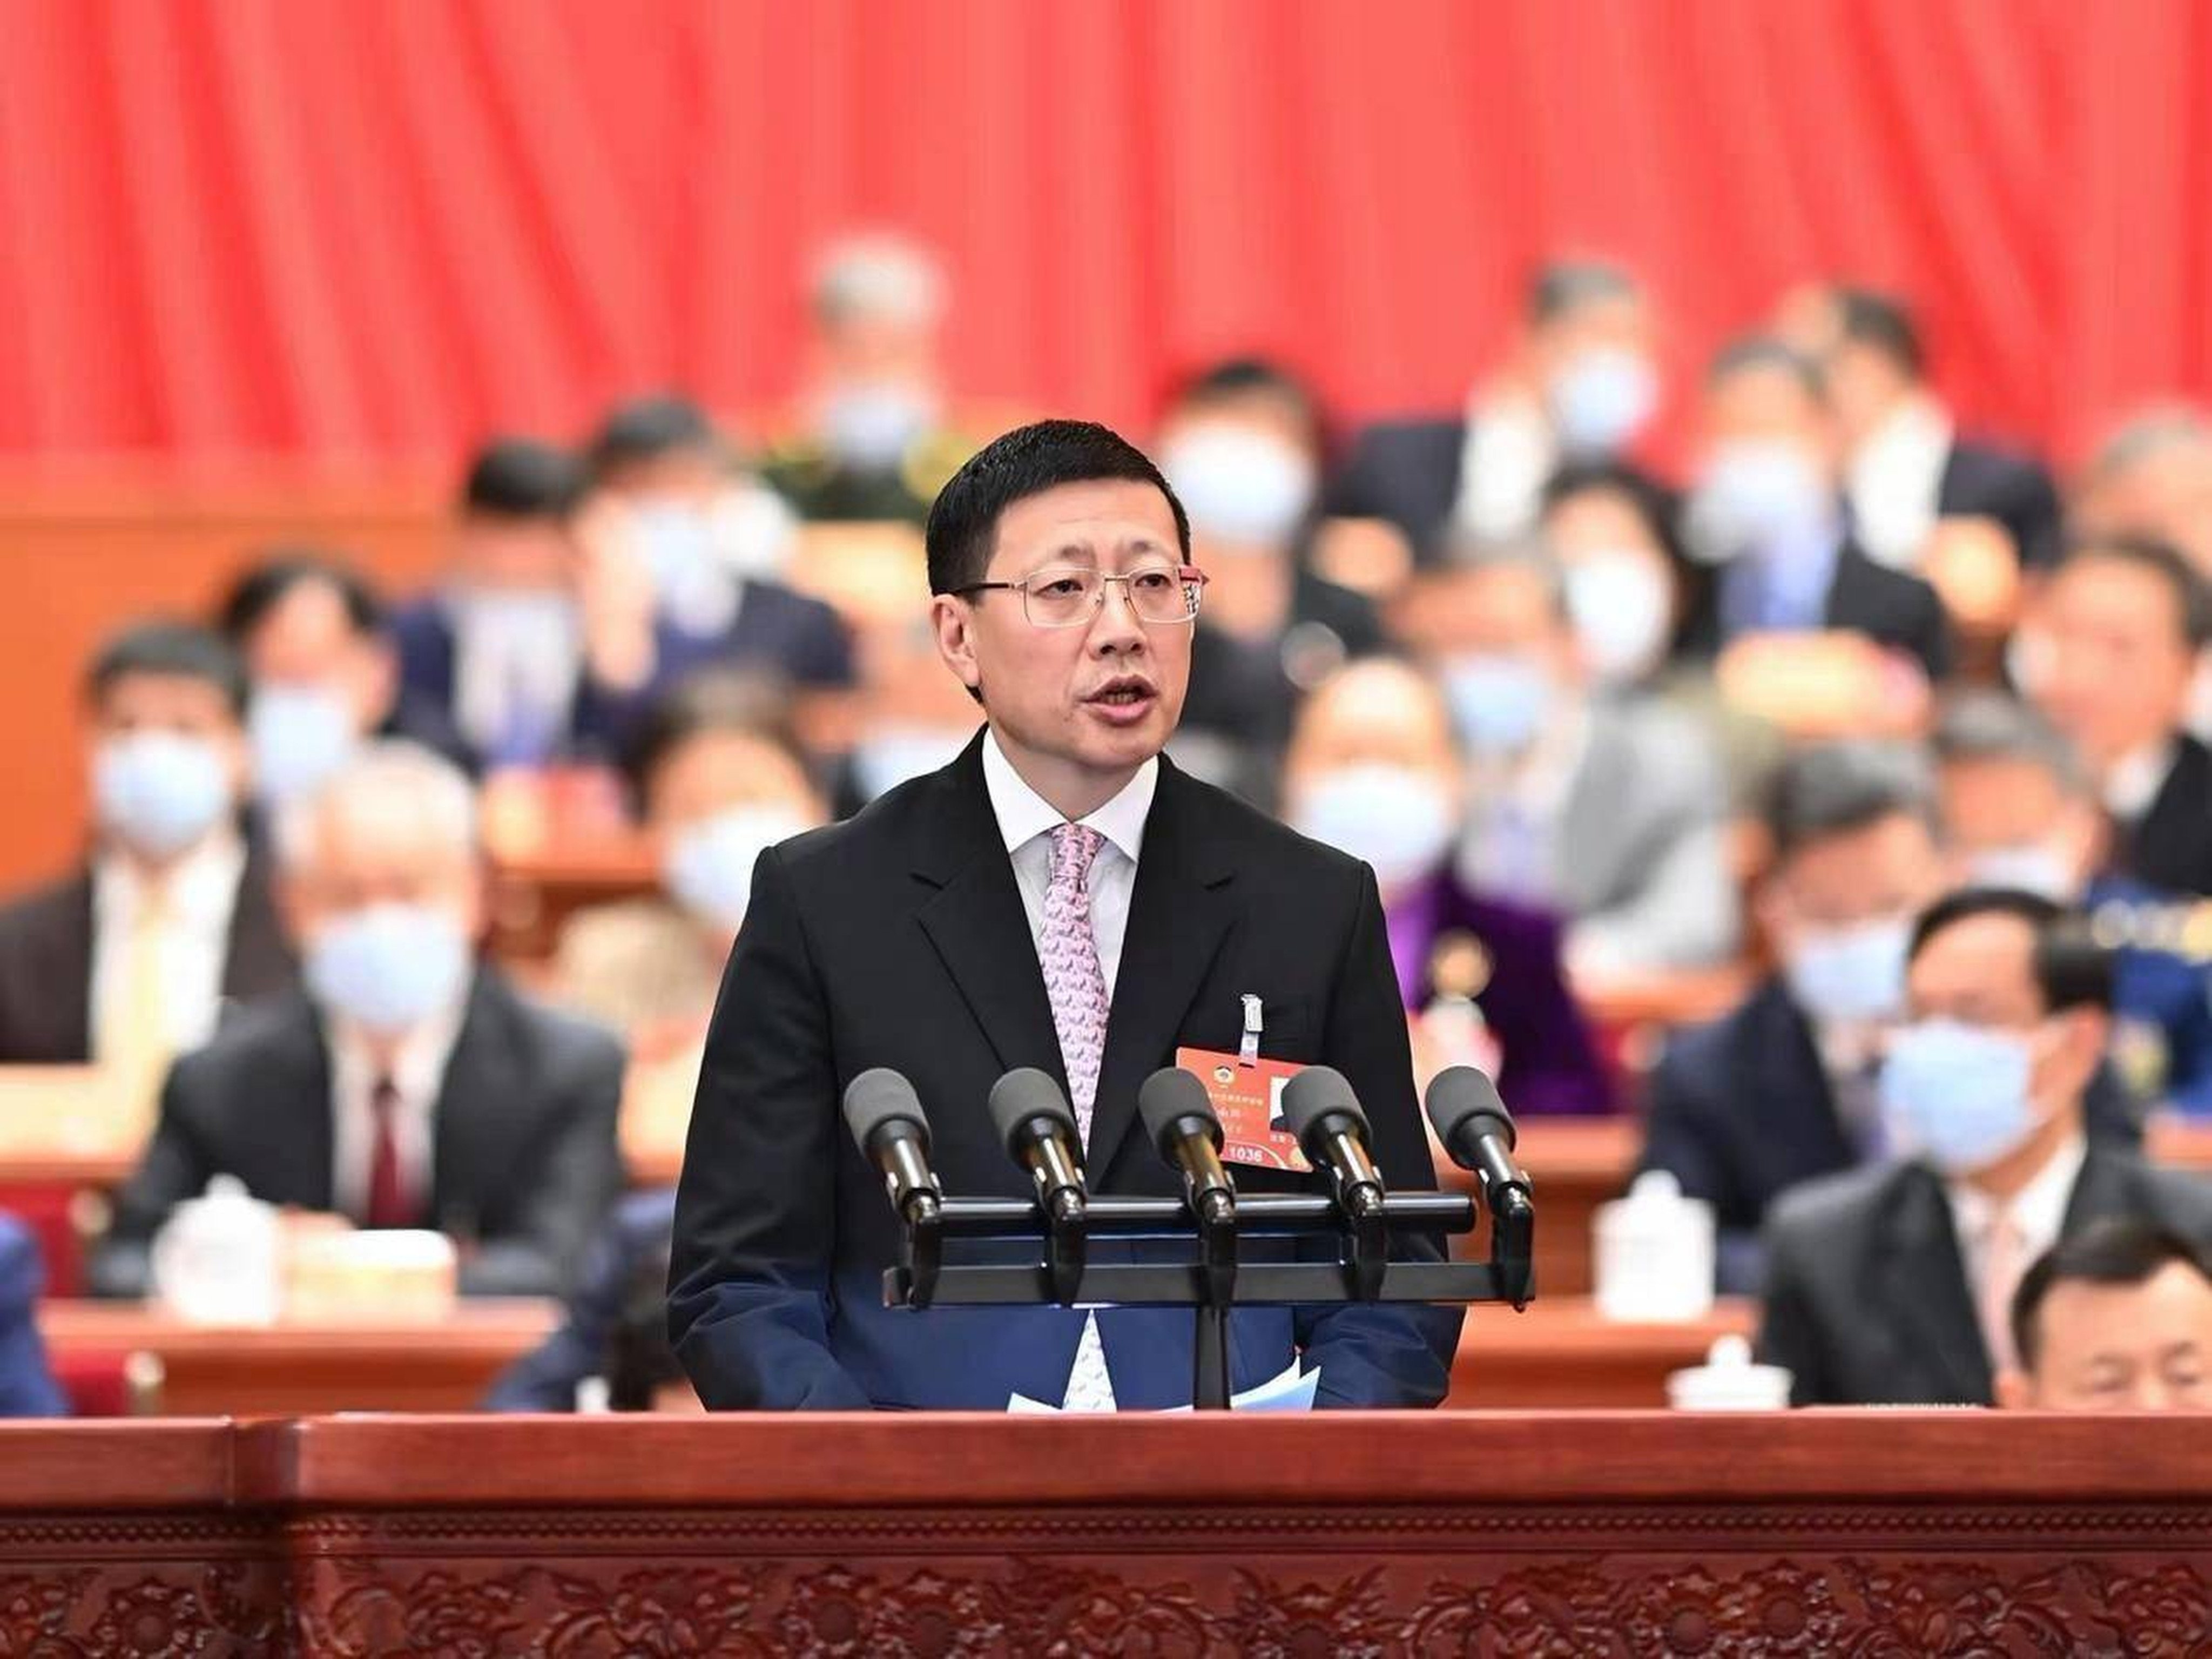 Venture capitalist Neil Shen Nanpeng speaks at the Chinese People’s Political Consultative Conference in Beijing on March 7, 2022. Photo: Xinhua